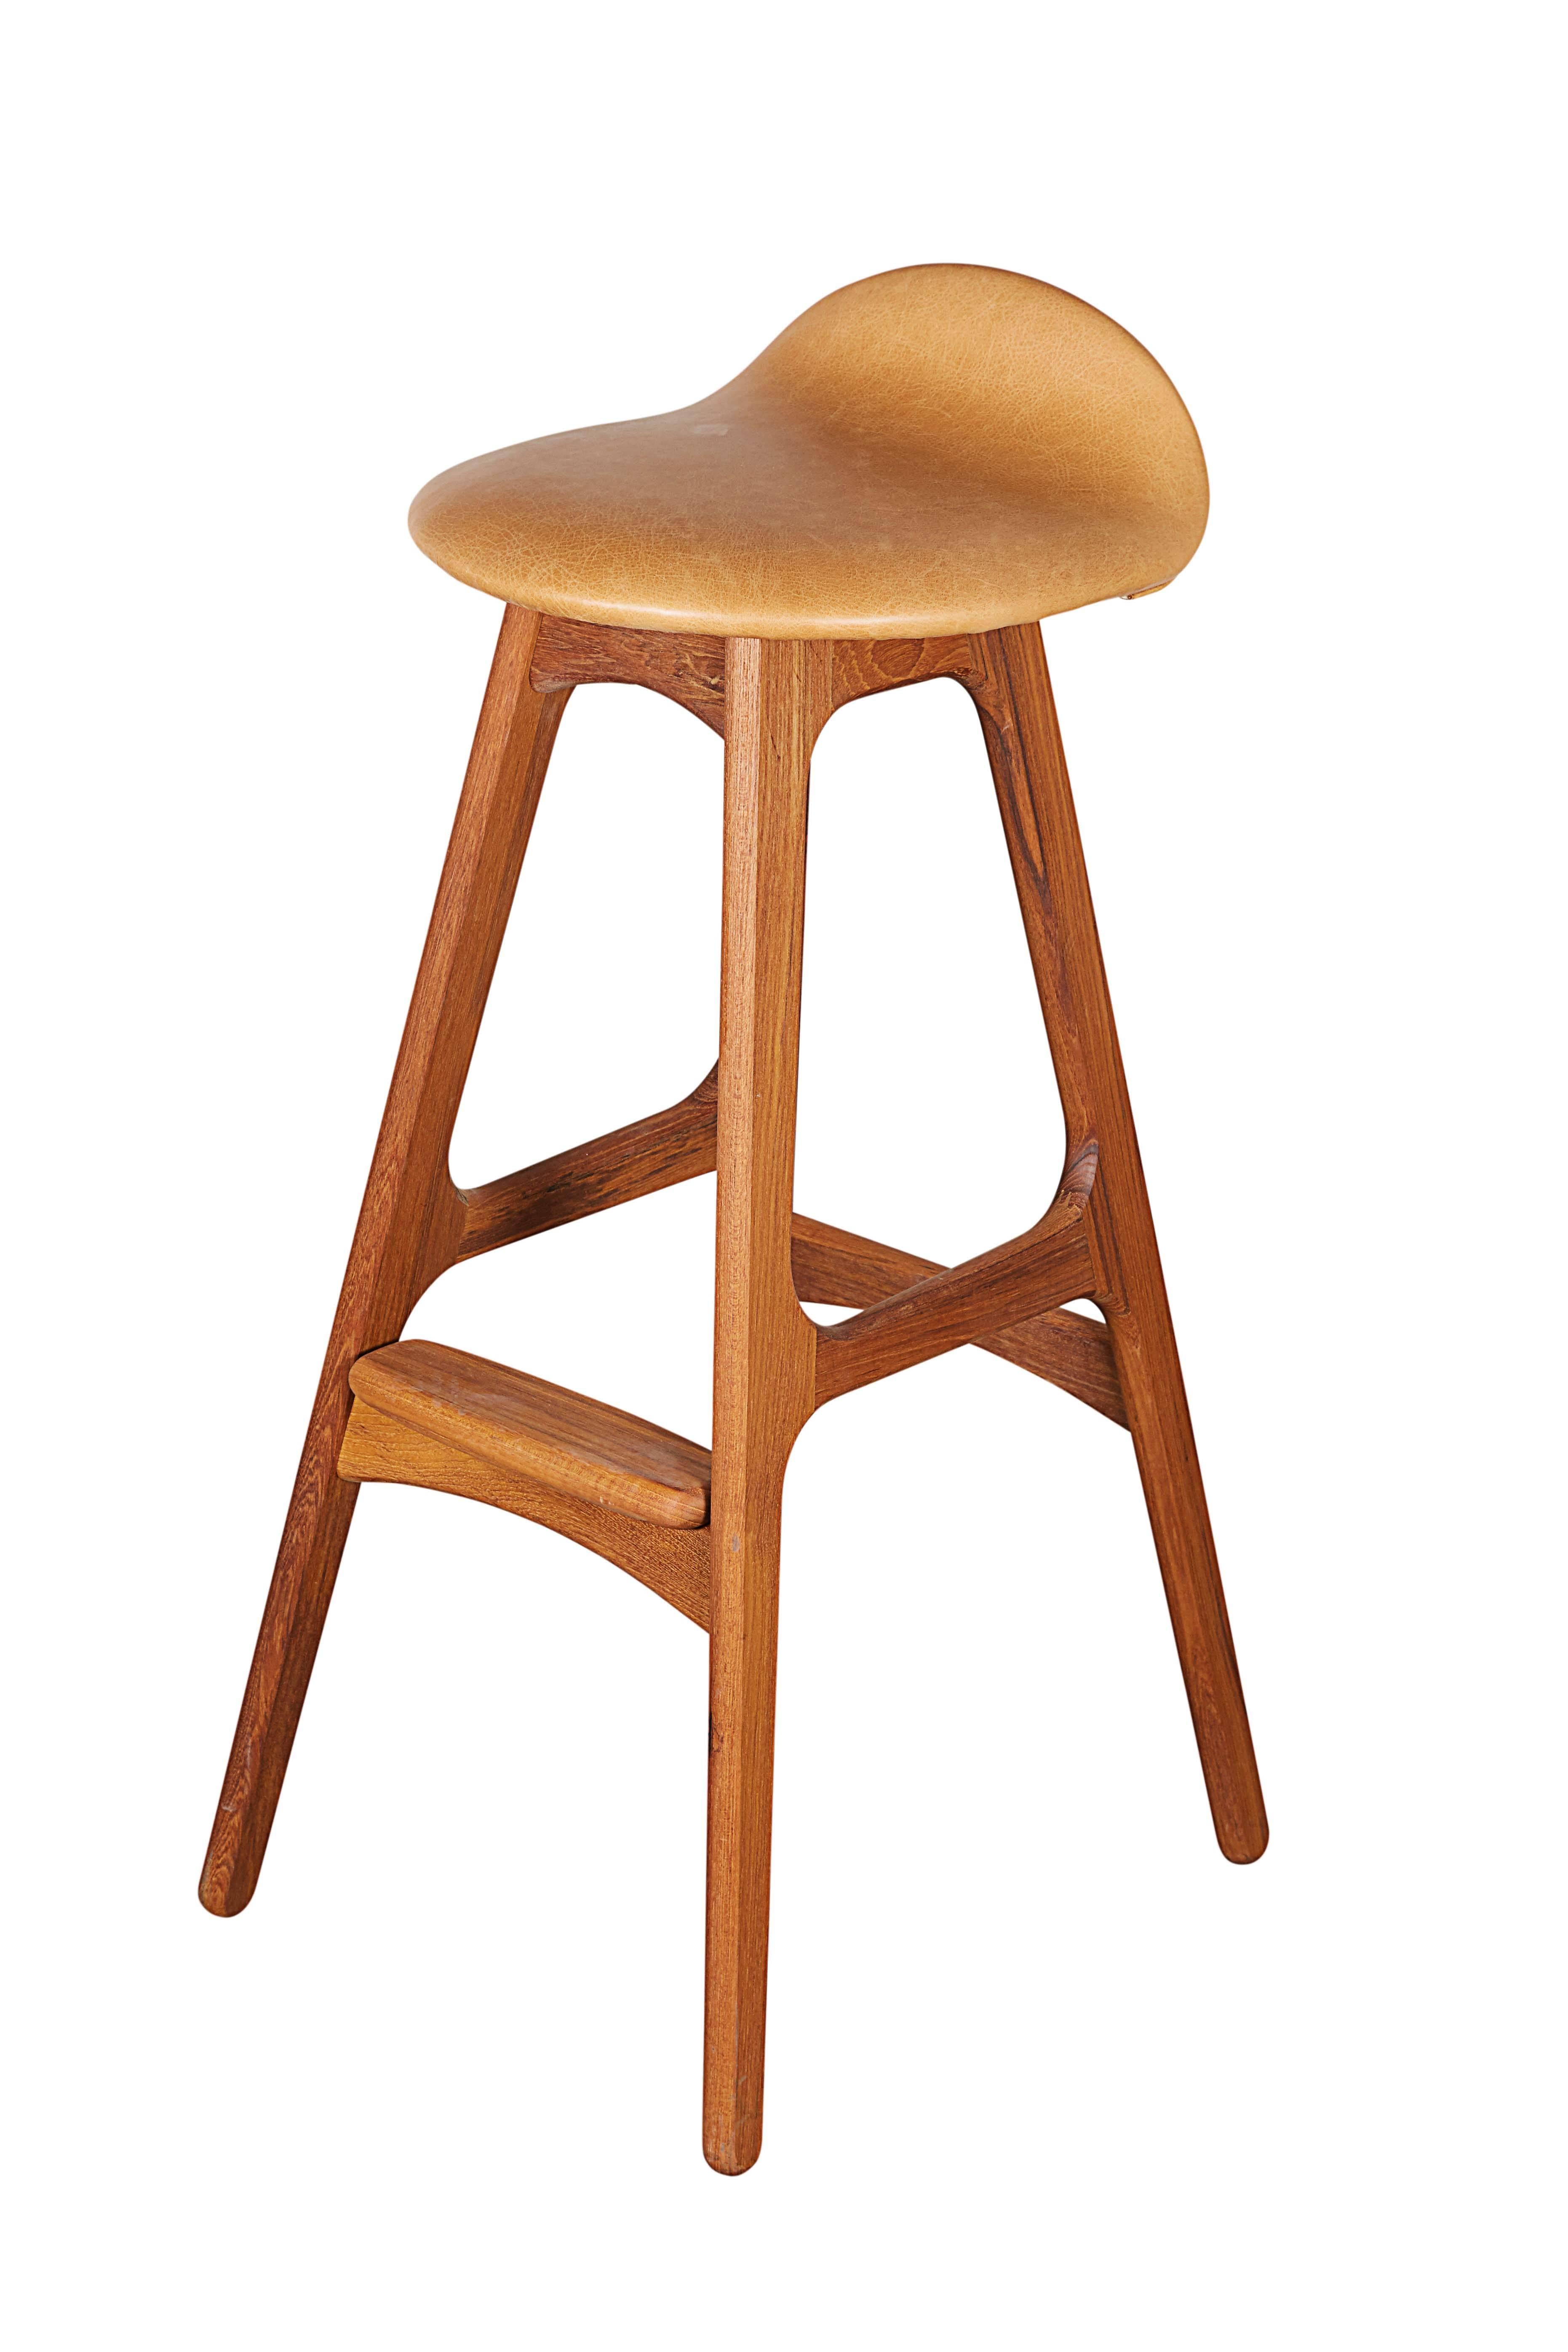 Tan Leather Counter Stools by Erik Buch, Set of Three  

This set of teak counter stools are in excellent condition, and have been newly upholstered in a beautiful weathered Italian tan leather. The back is surprisingly supportive so sit up straight